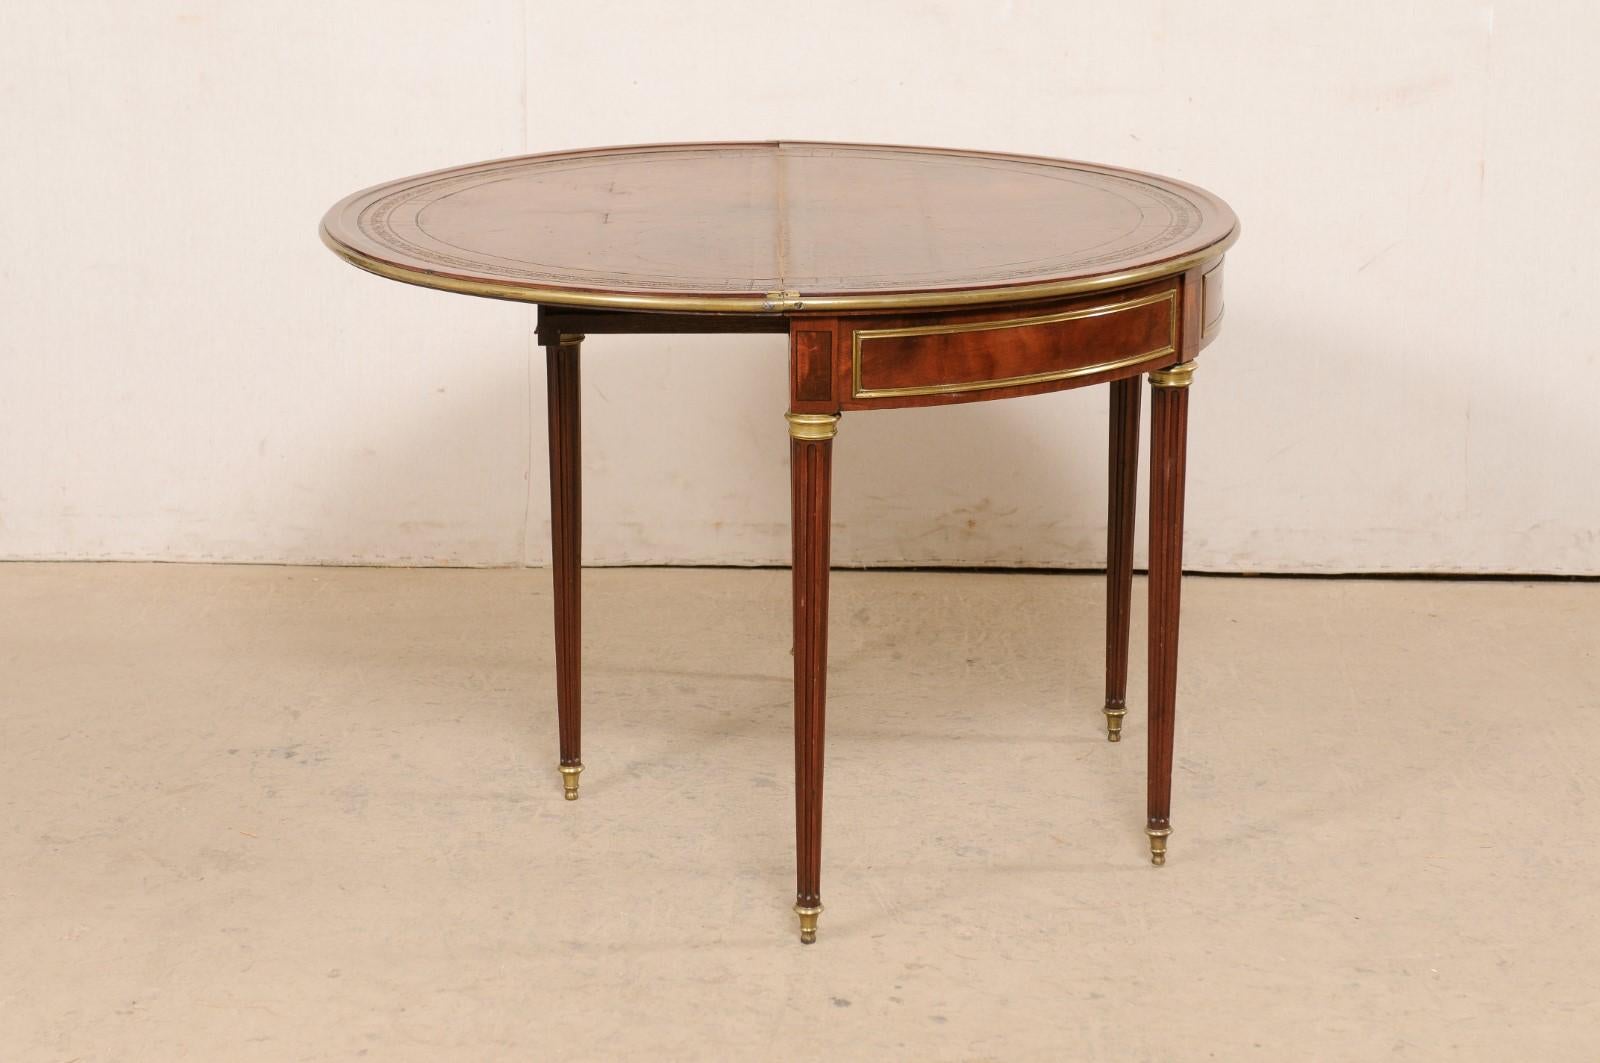  Elegant French Neoclassical Demi-to-round Table W/ Brass Accents, 19th C.  5